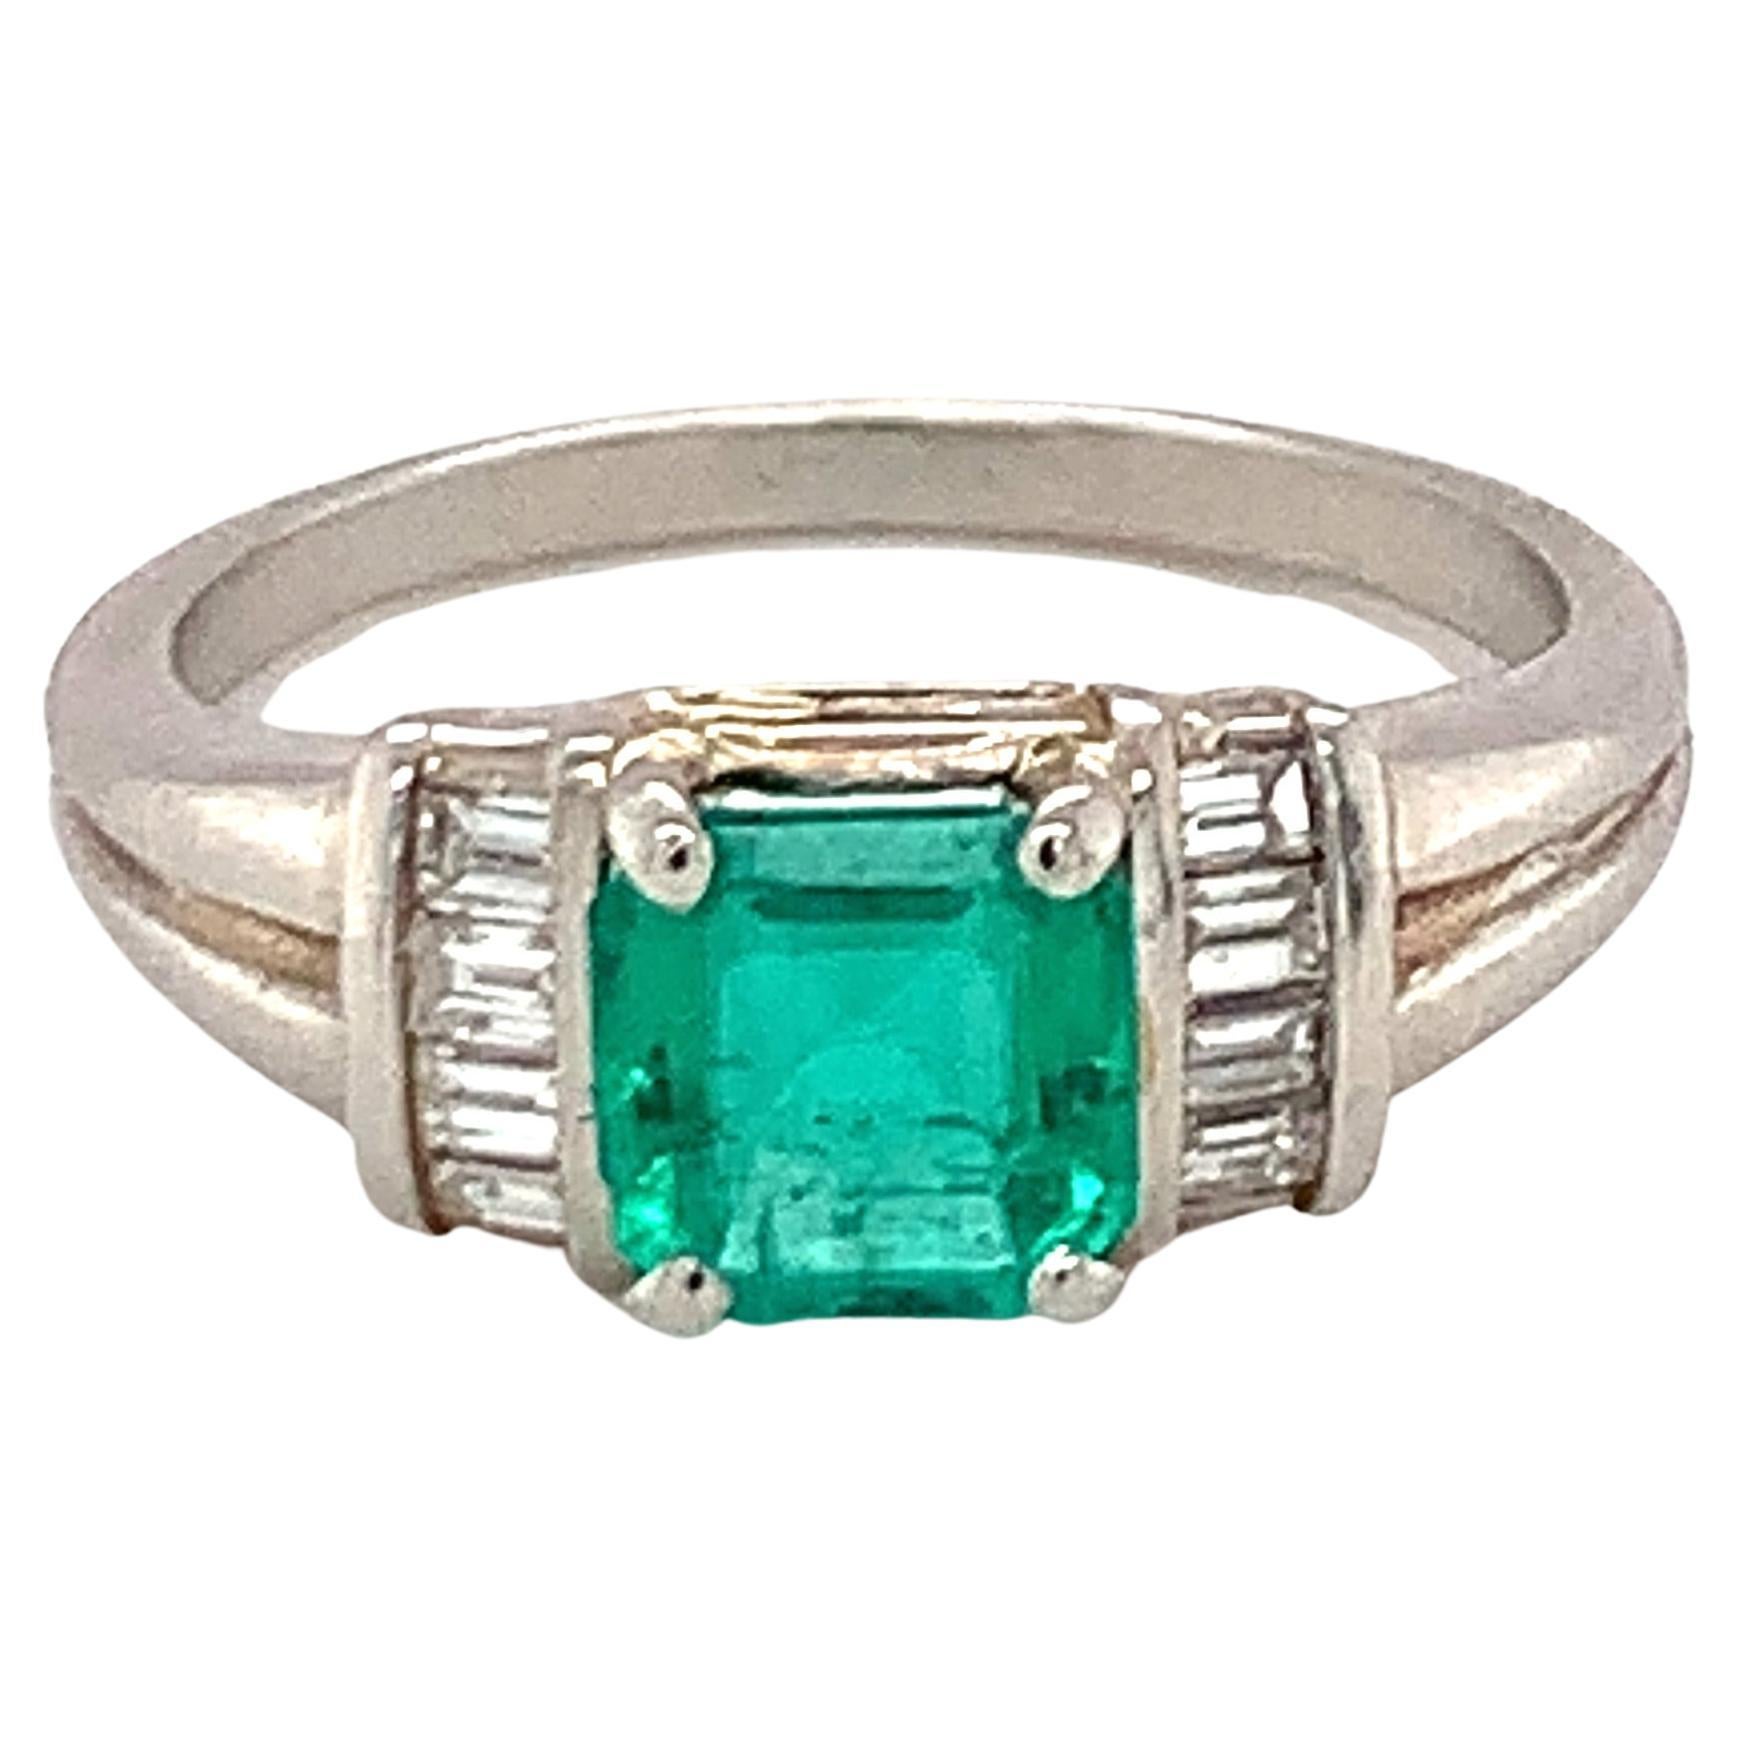 One emerald and diamond platinum ring featuring one square step-cut emerald weighing 1 ct. flanked by 8 baguette cut diamonds totaling 0.25 ct. with G color and VS-1 clarity. Contemporary piece.

Enchanting, darling, dainty.

Metal: